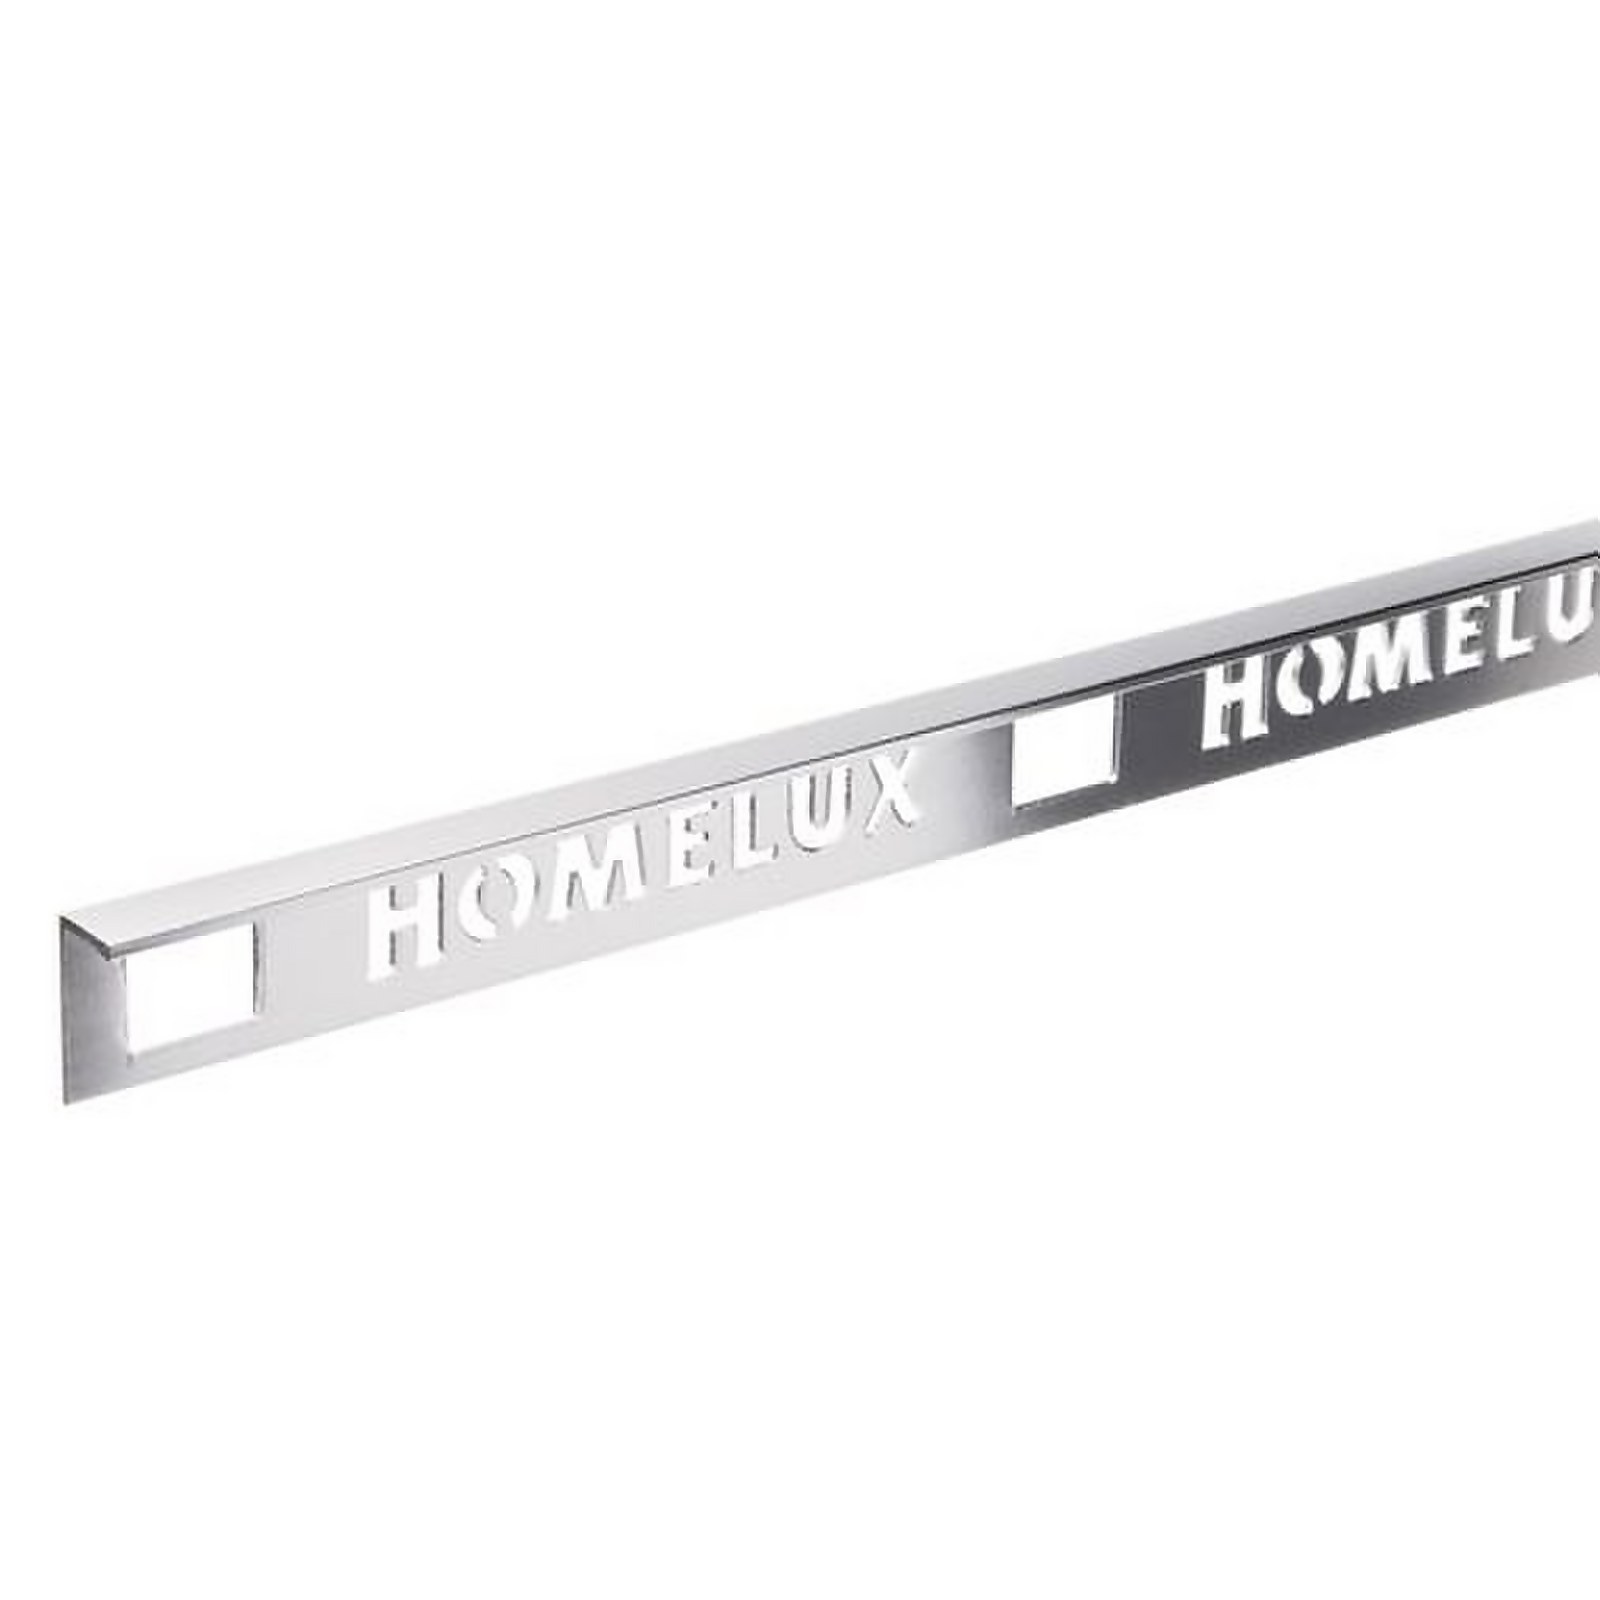 Photo of Homelux 8mm Straight Edge Tile Trim - Silver Effect - 1.83m